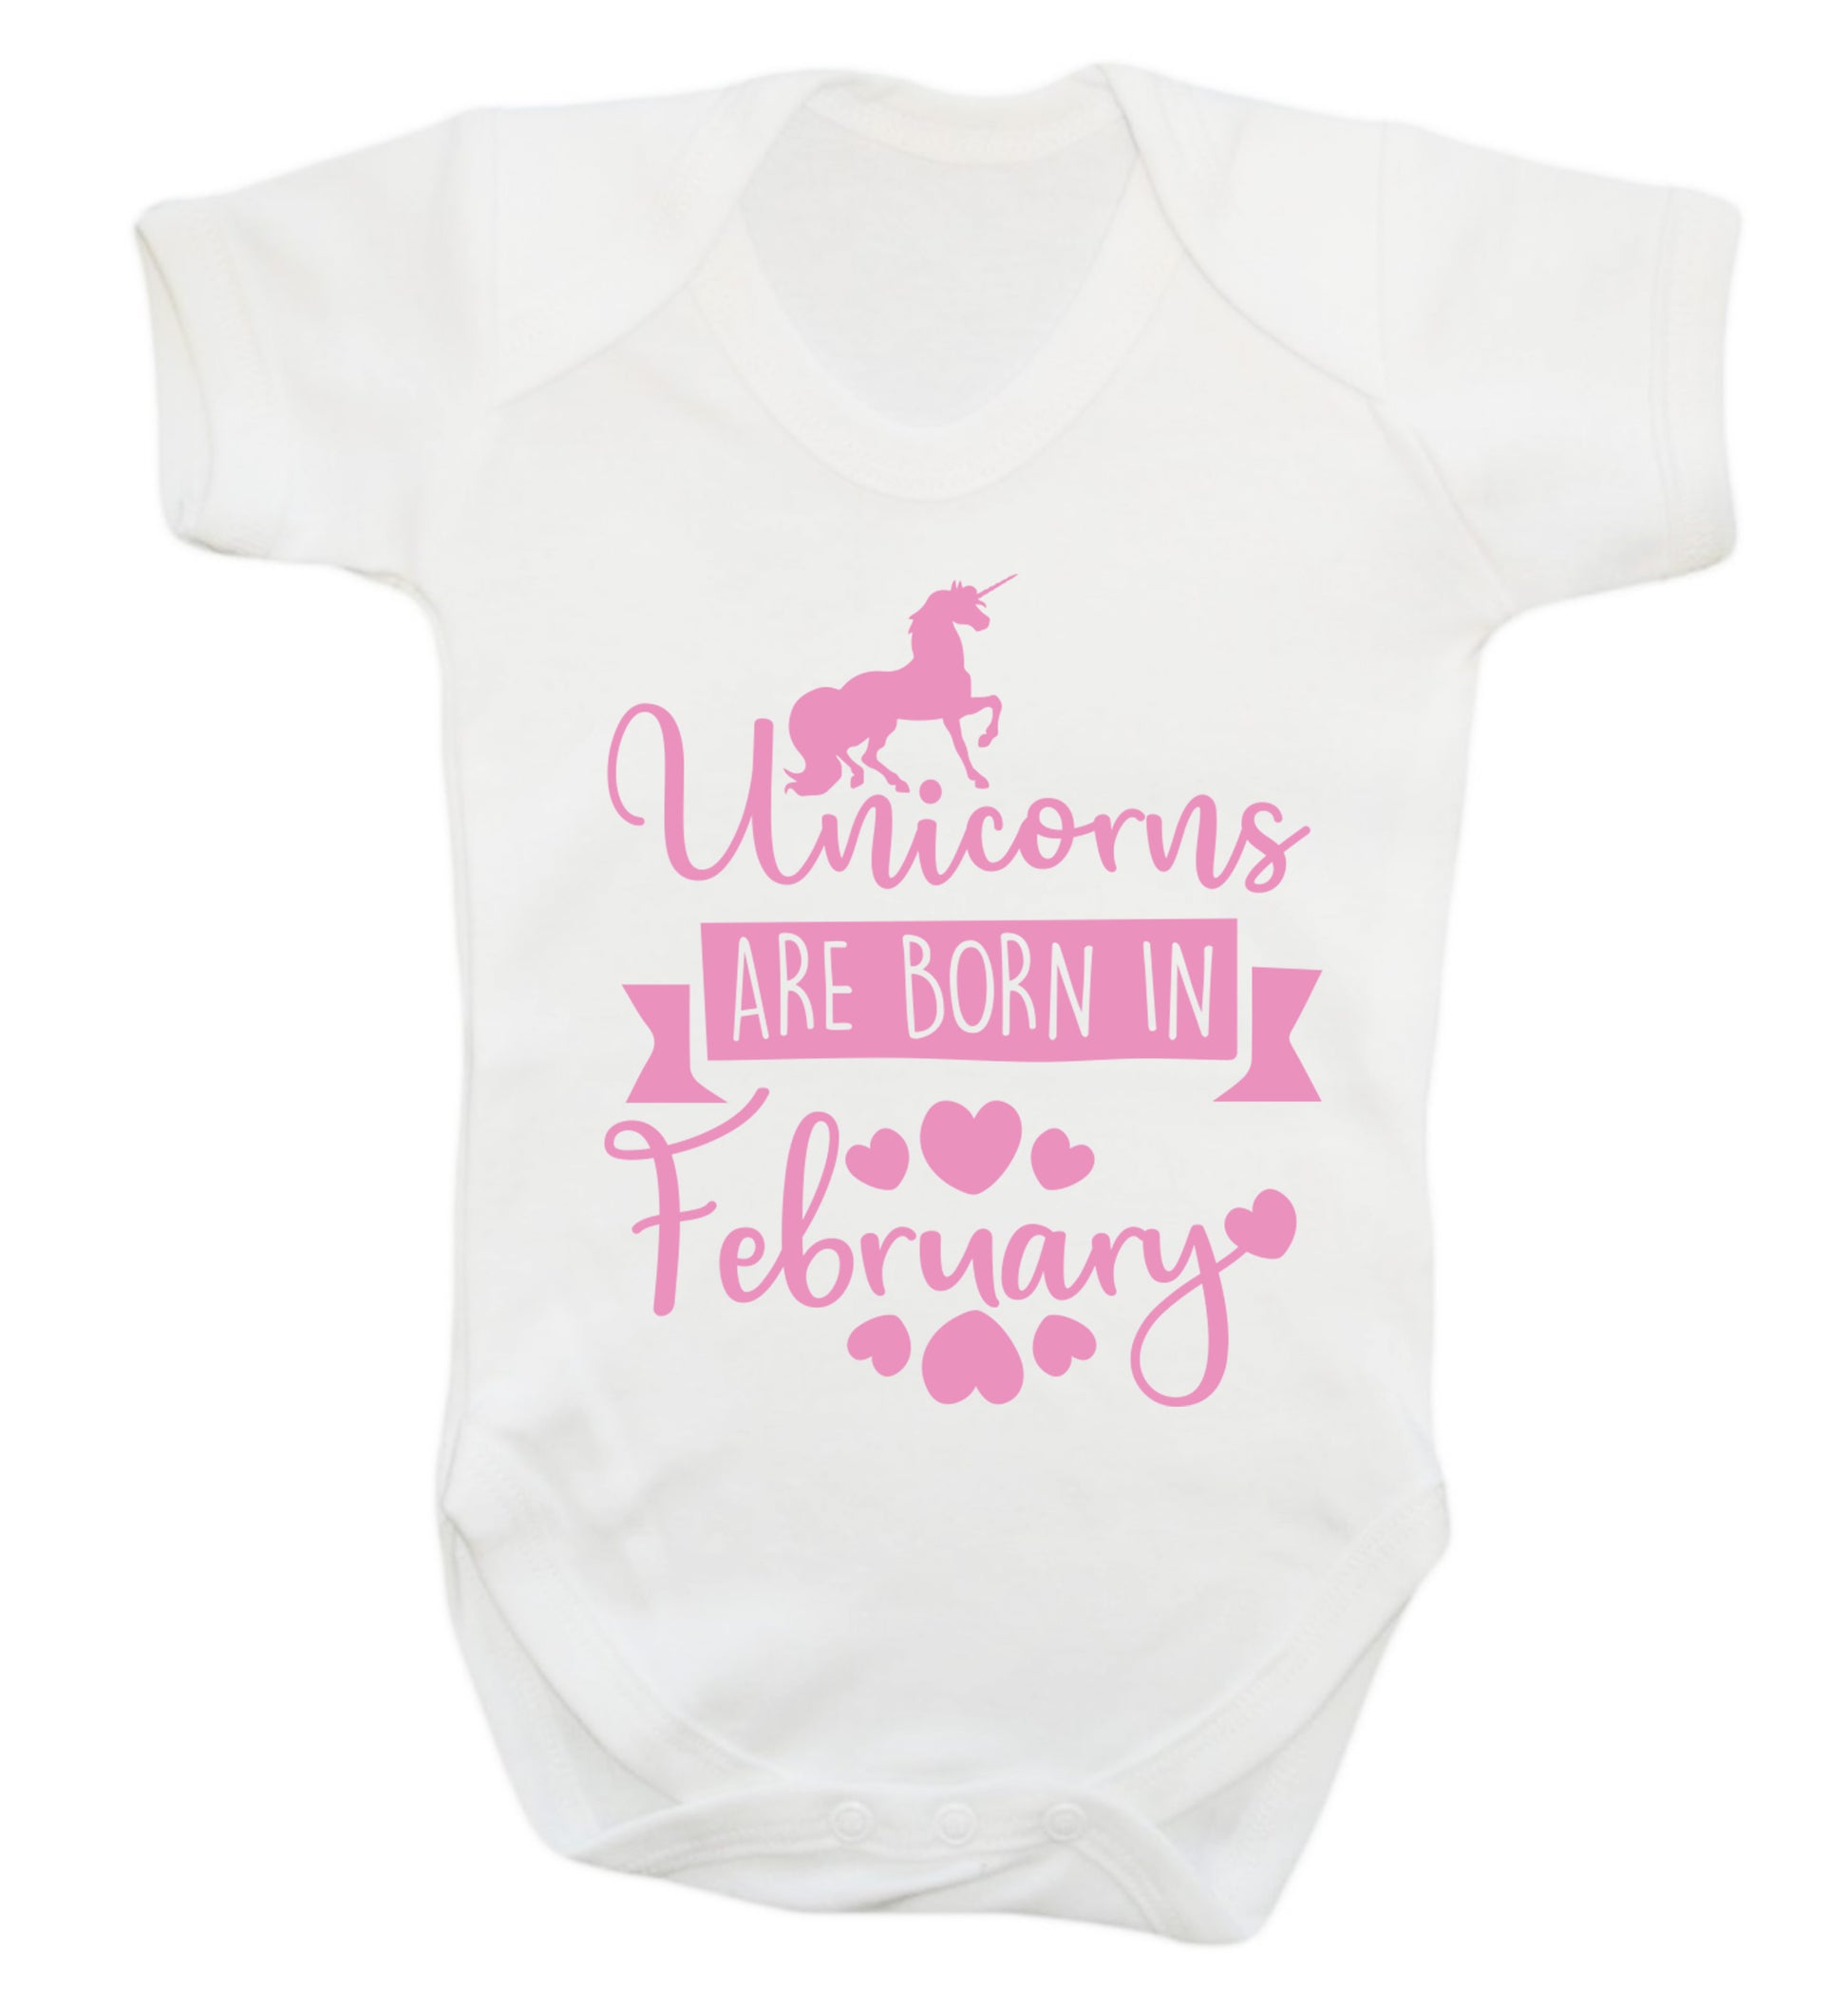 Unicorns are born in February Baby Vest white 18-24 months